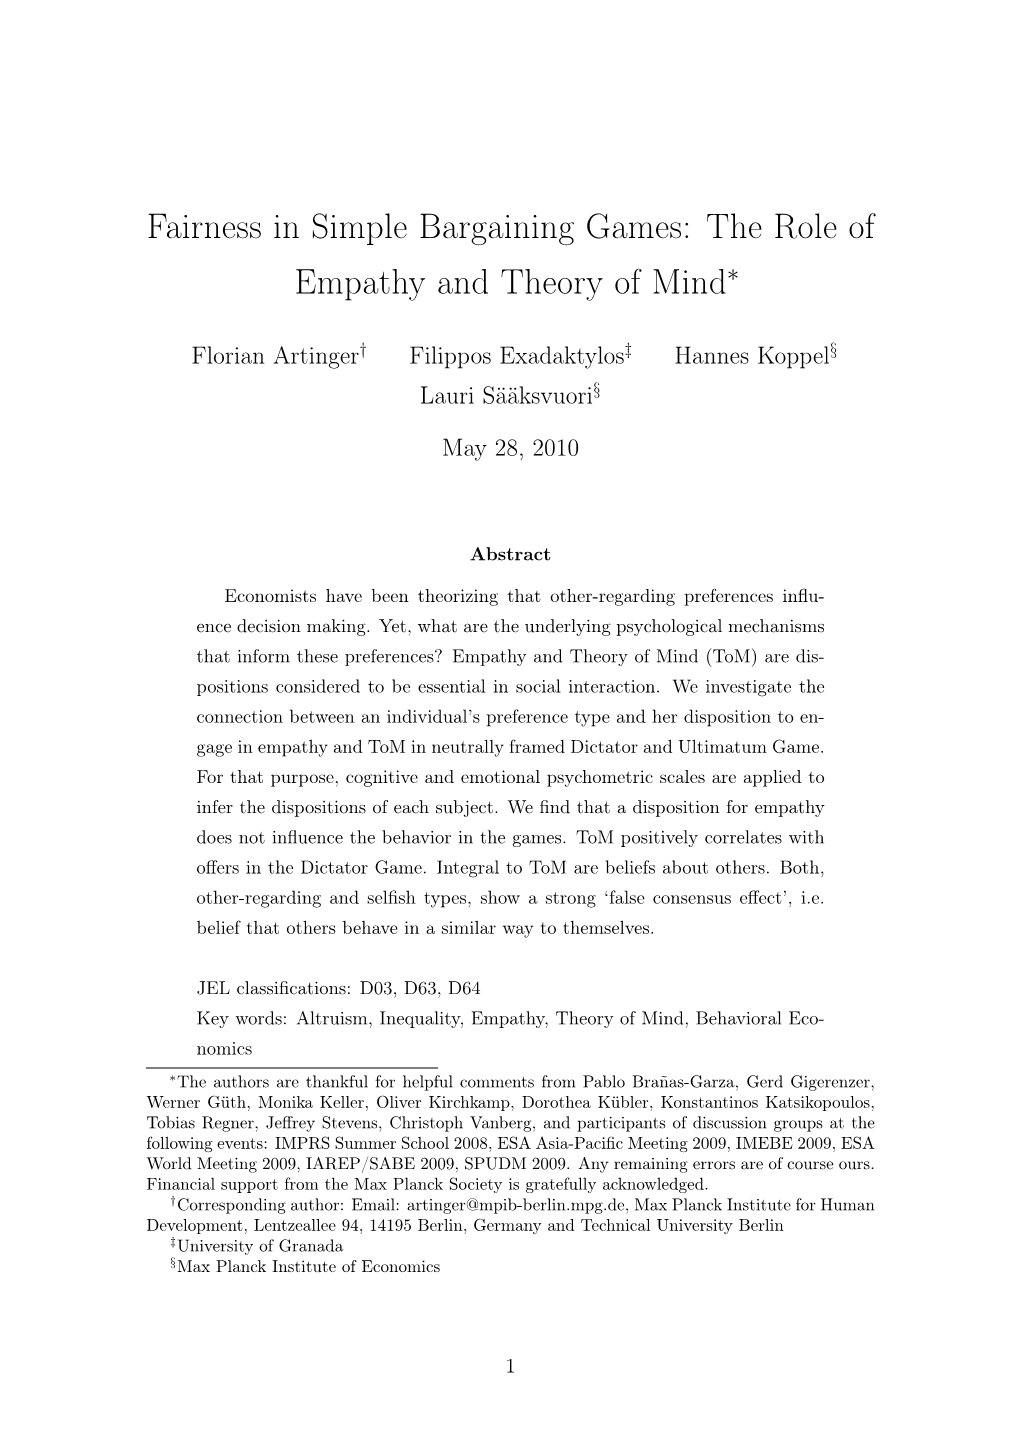 Fairness in Simple Bargaining Games: the Role of Empathy and Theory of Mind∗